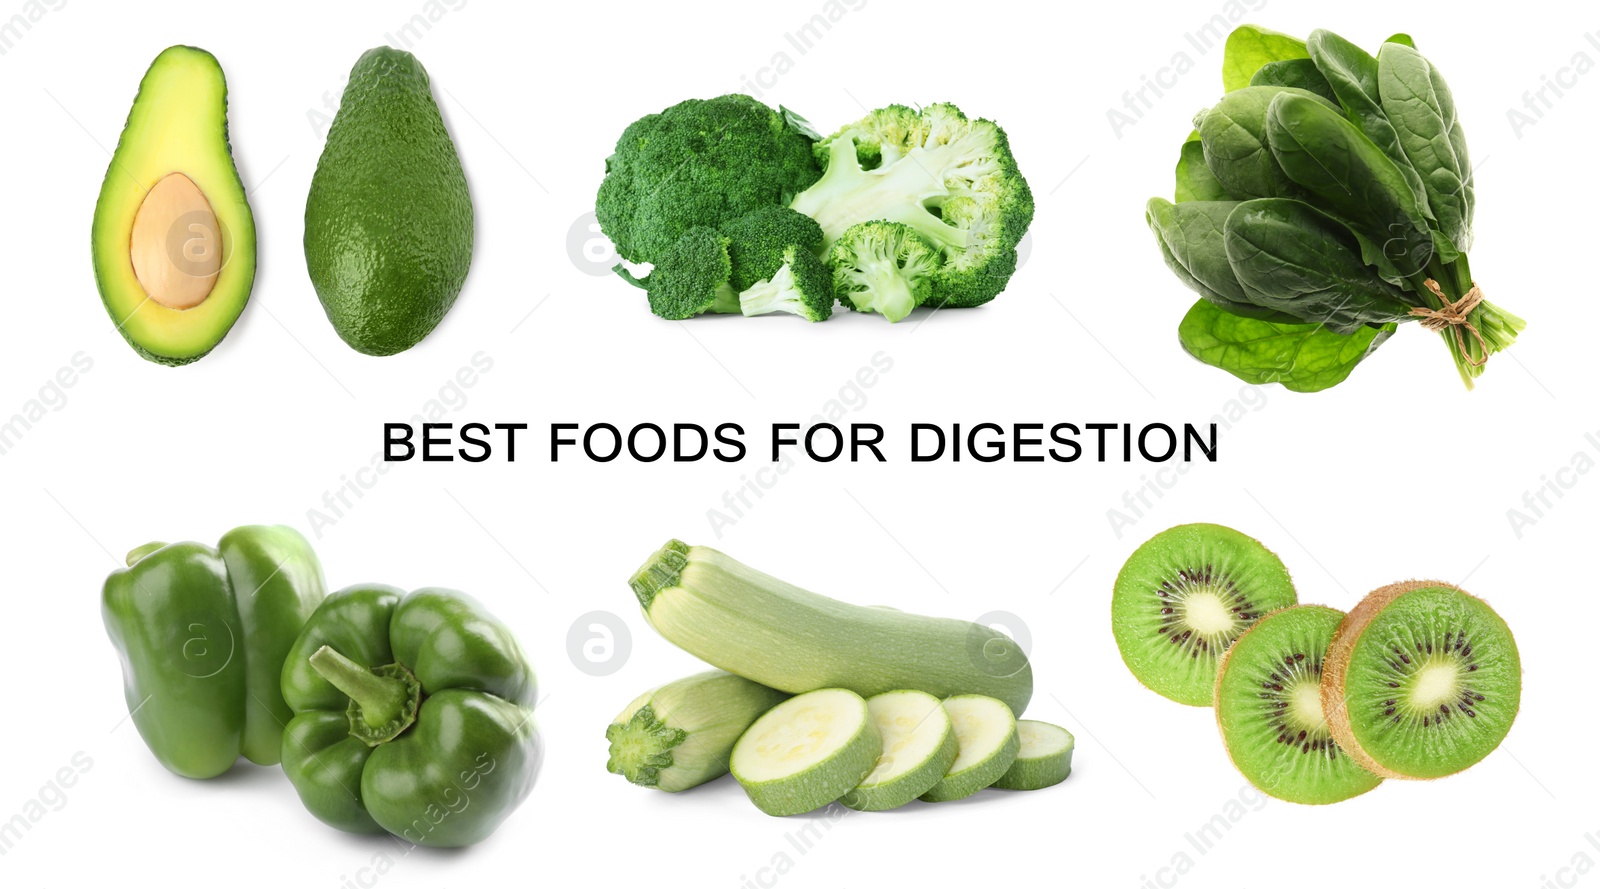 Image of Foods for healthy digestion, collage. Broccoli, avocado, green bell peppers, kiwis, spinach and zucchinis on white background